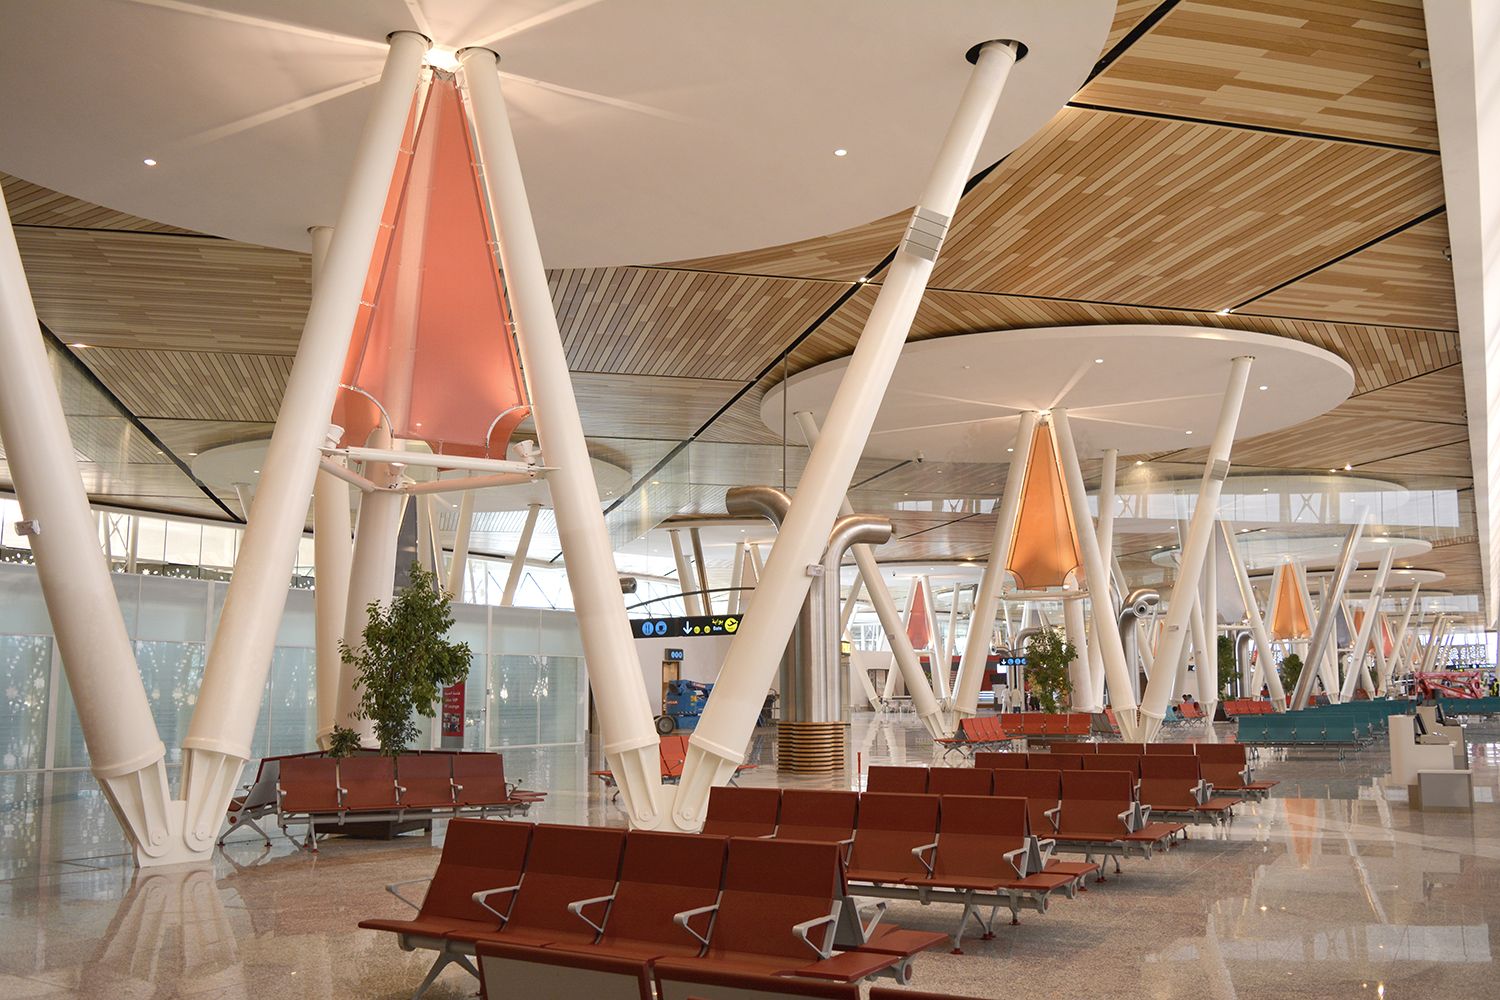 New terminal at Marrakech Airport in Morocco